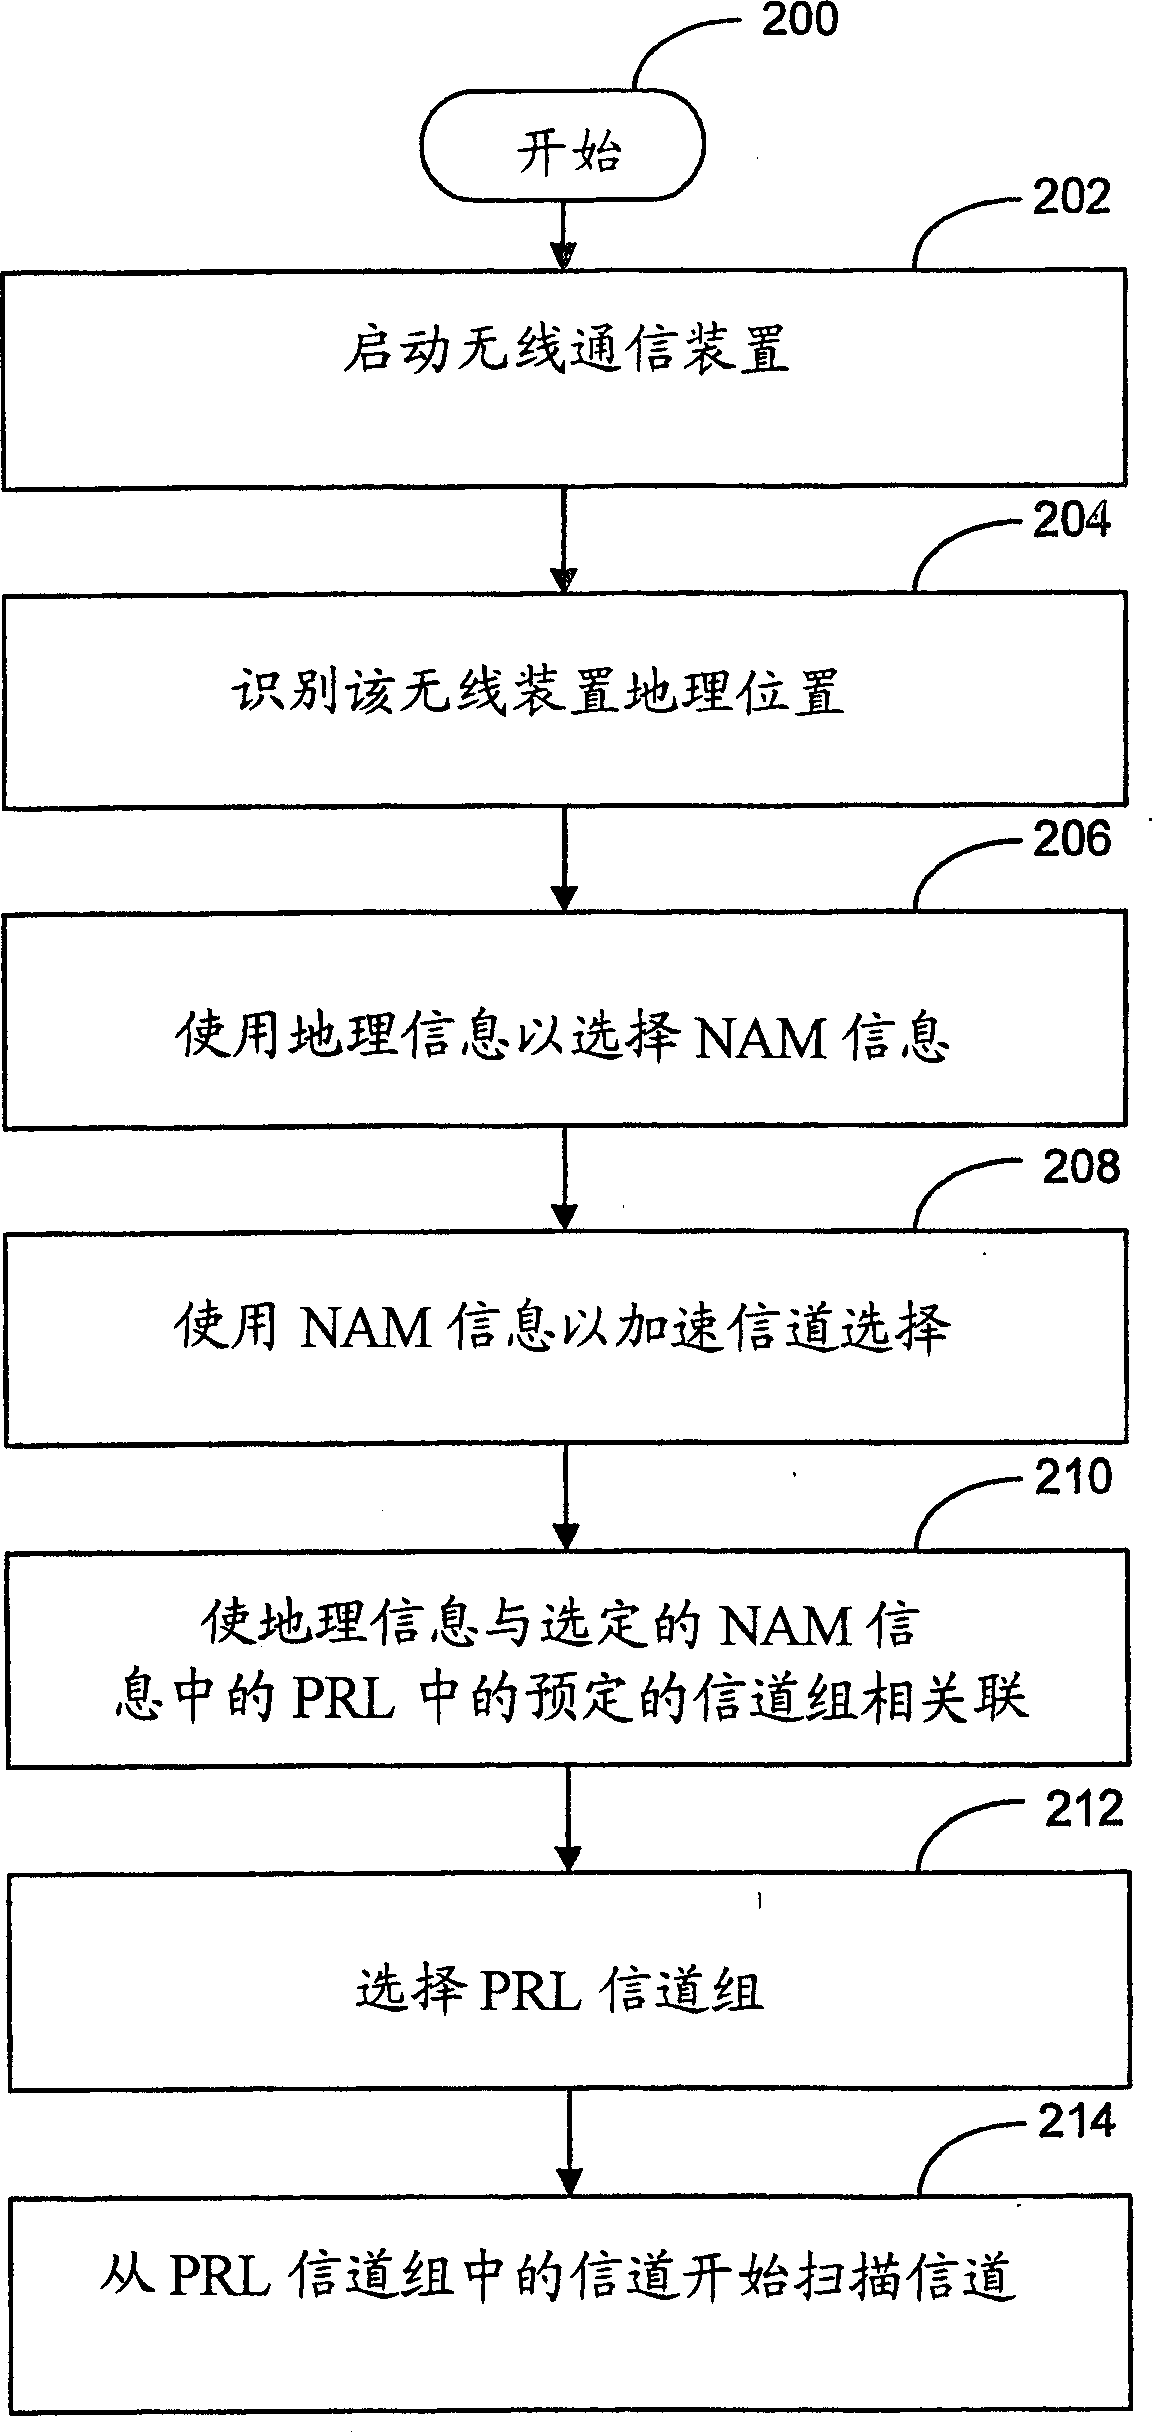 System and method for selecting communications coverage network information in a wireless communications device